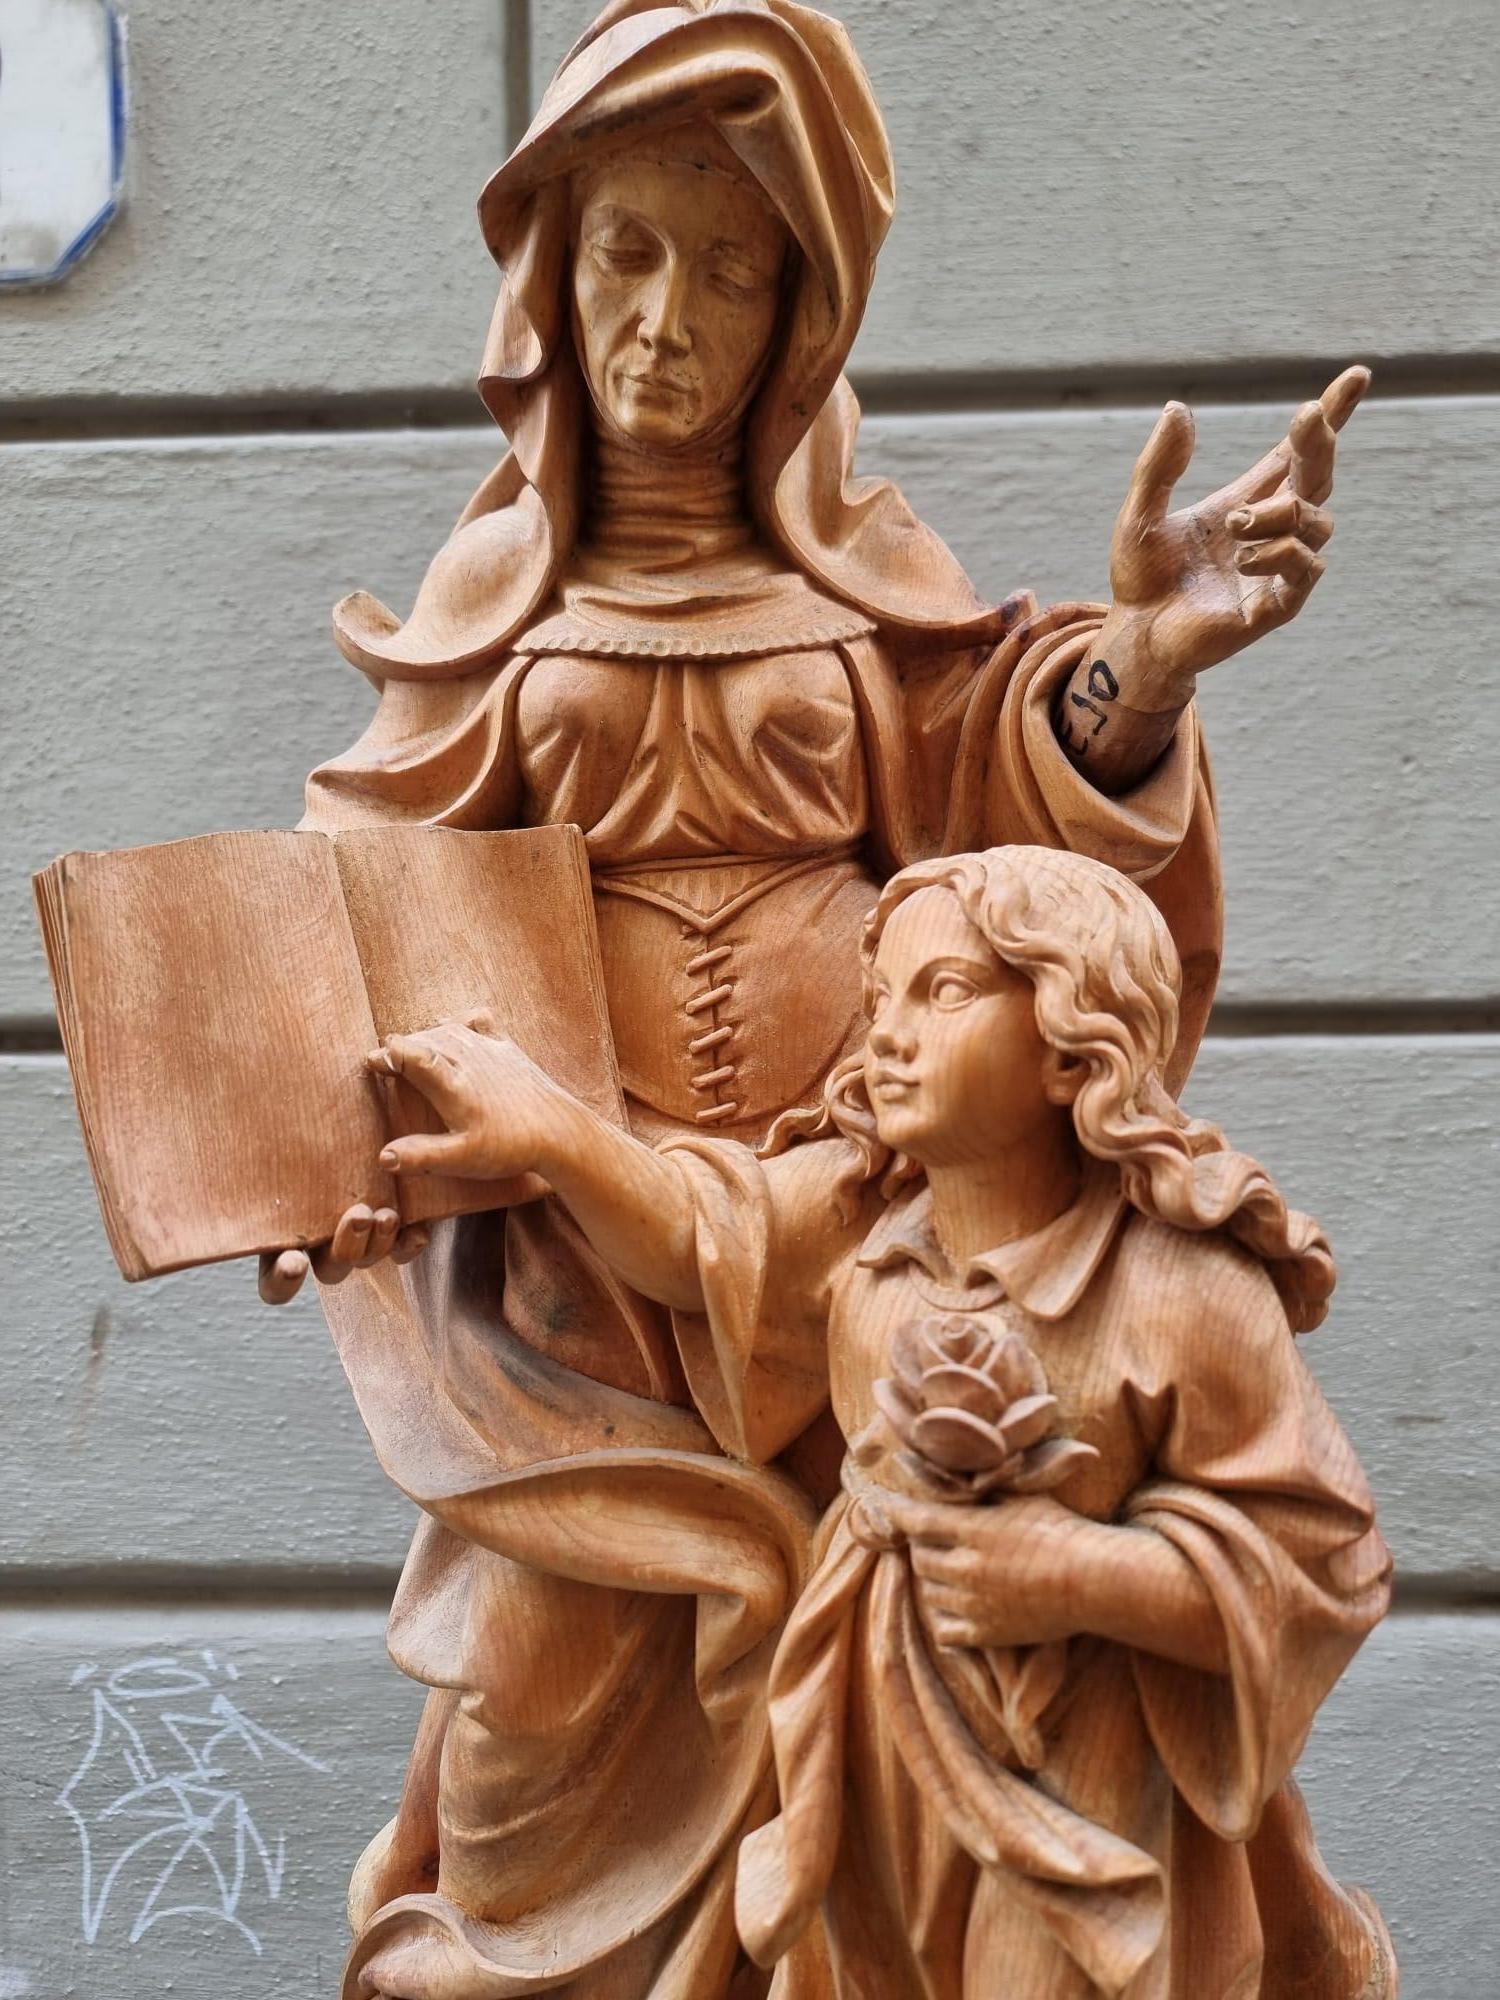 Beautiful wooden sculpture in pine wood depicting Saint Anne and Mary as a child.

Extremely refined details, 19th century, Trentino.

Dimensions: 10x27x60cm